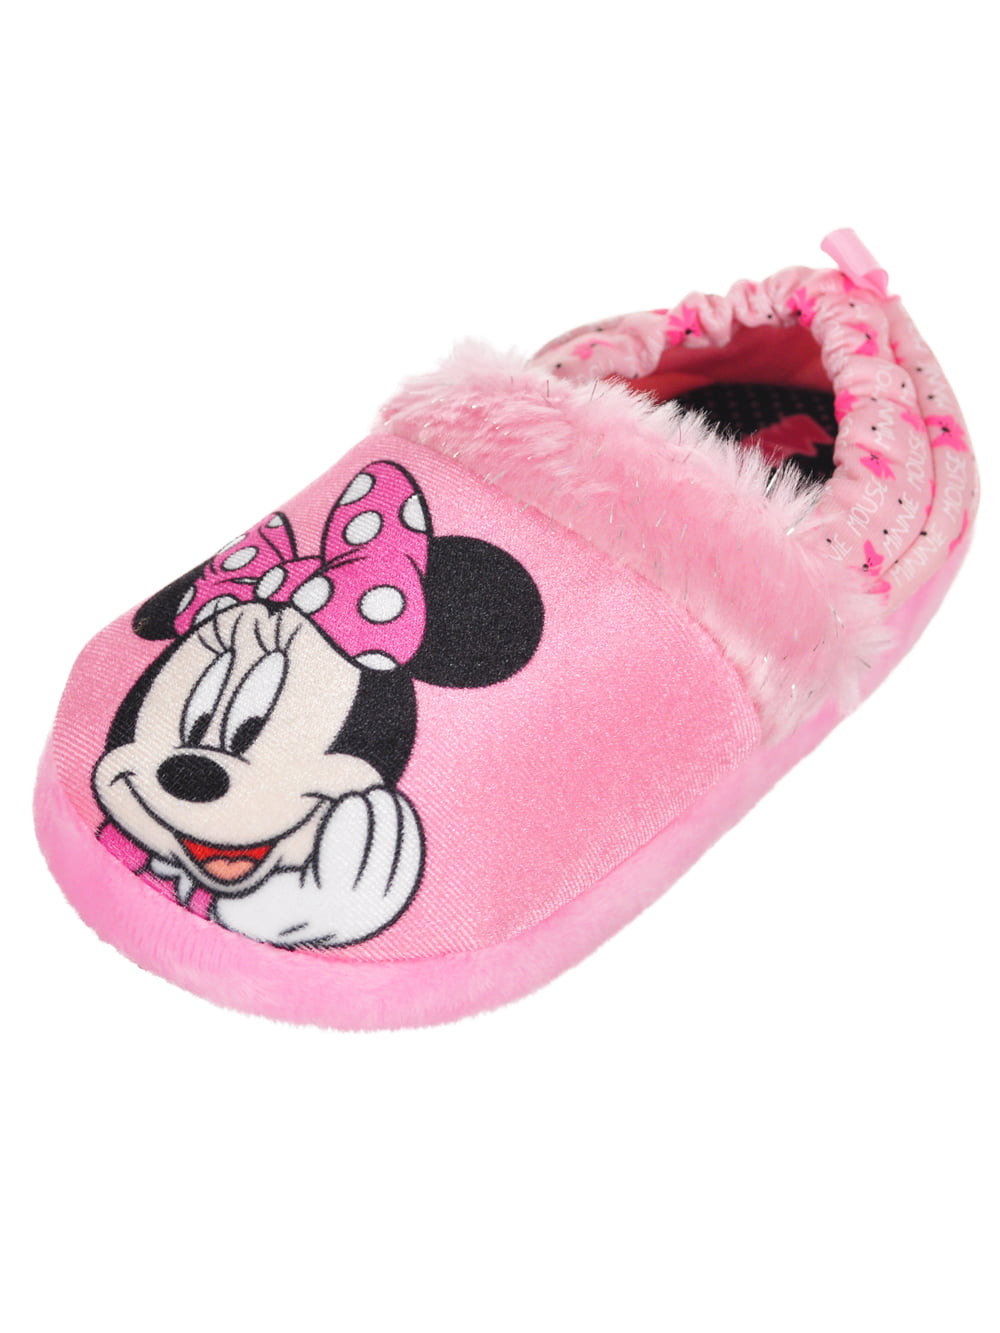 childrens slippers size 7